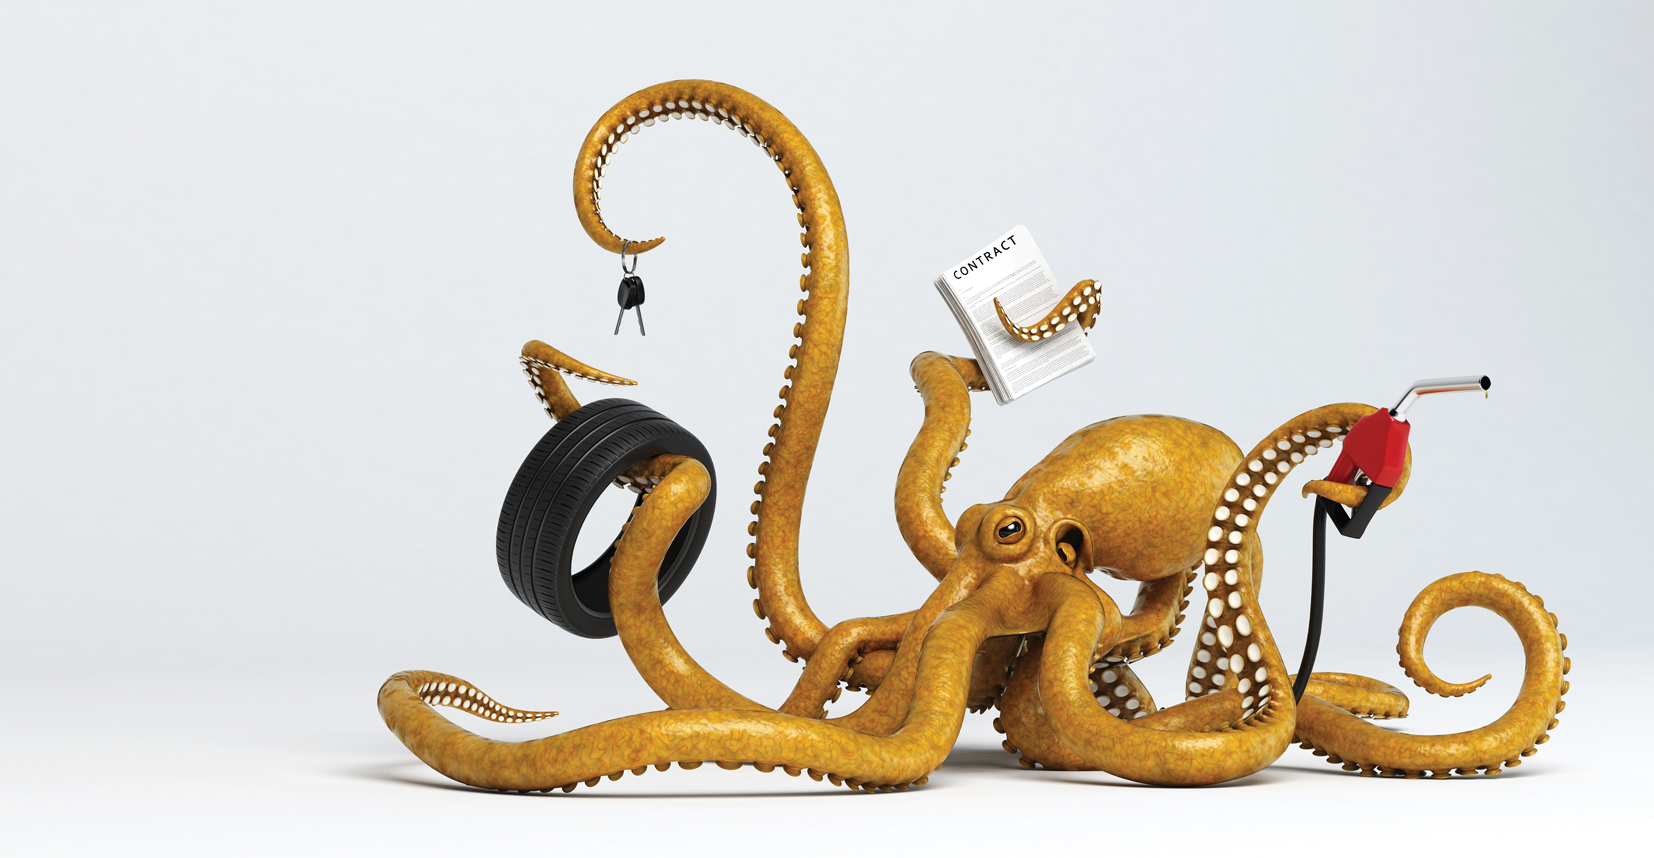 Contract Octopus